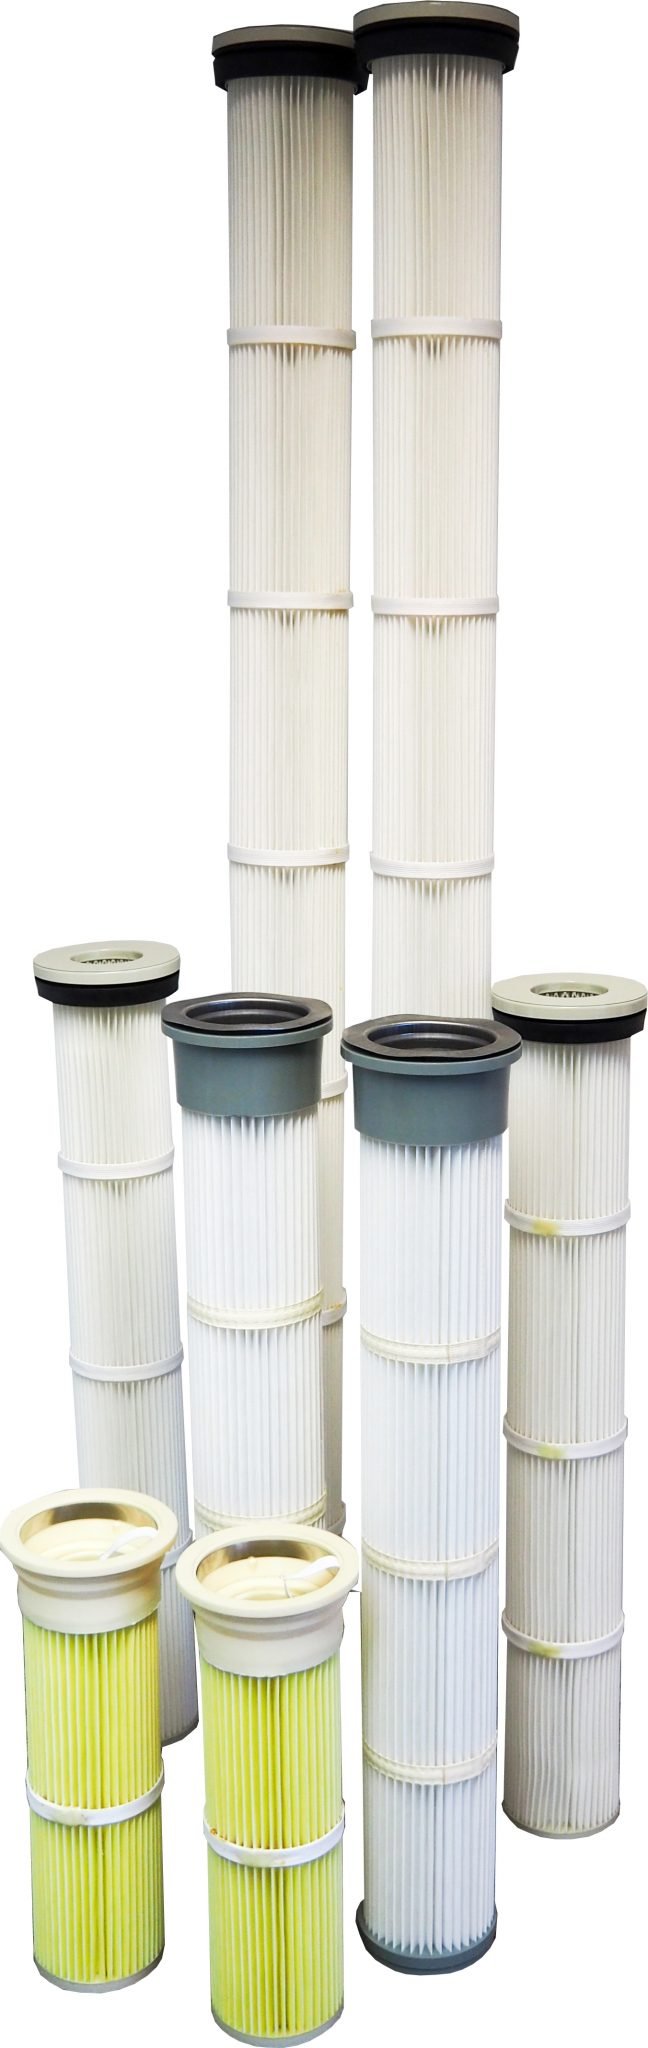 DUSTEX stocks a range of pleated filter cartridges for industrial dust collectors, available for despatch throughout New Zealand.